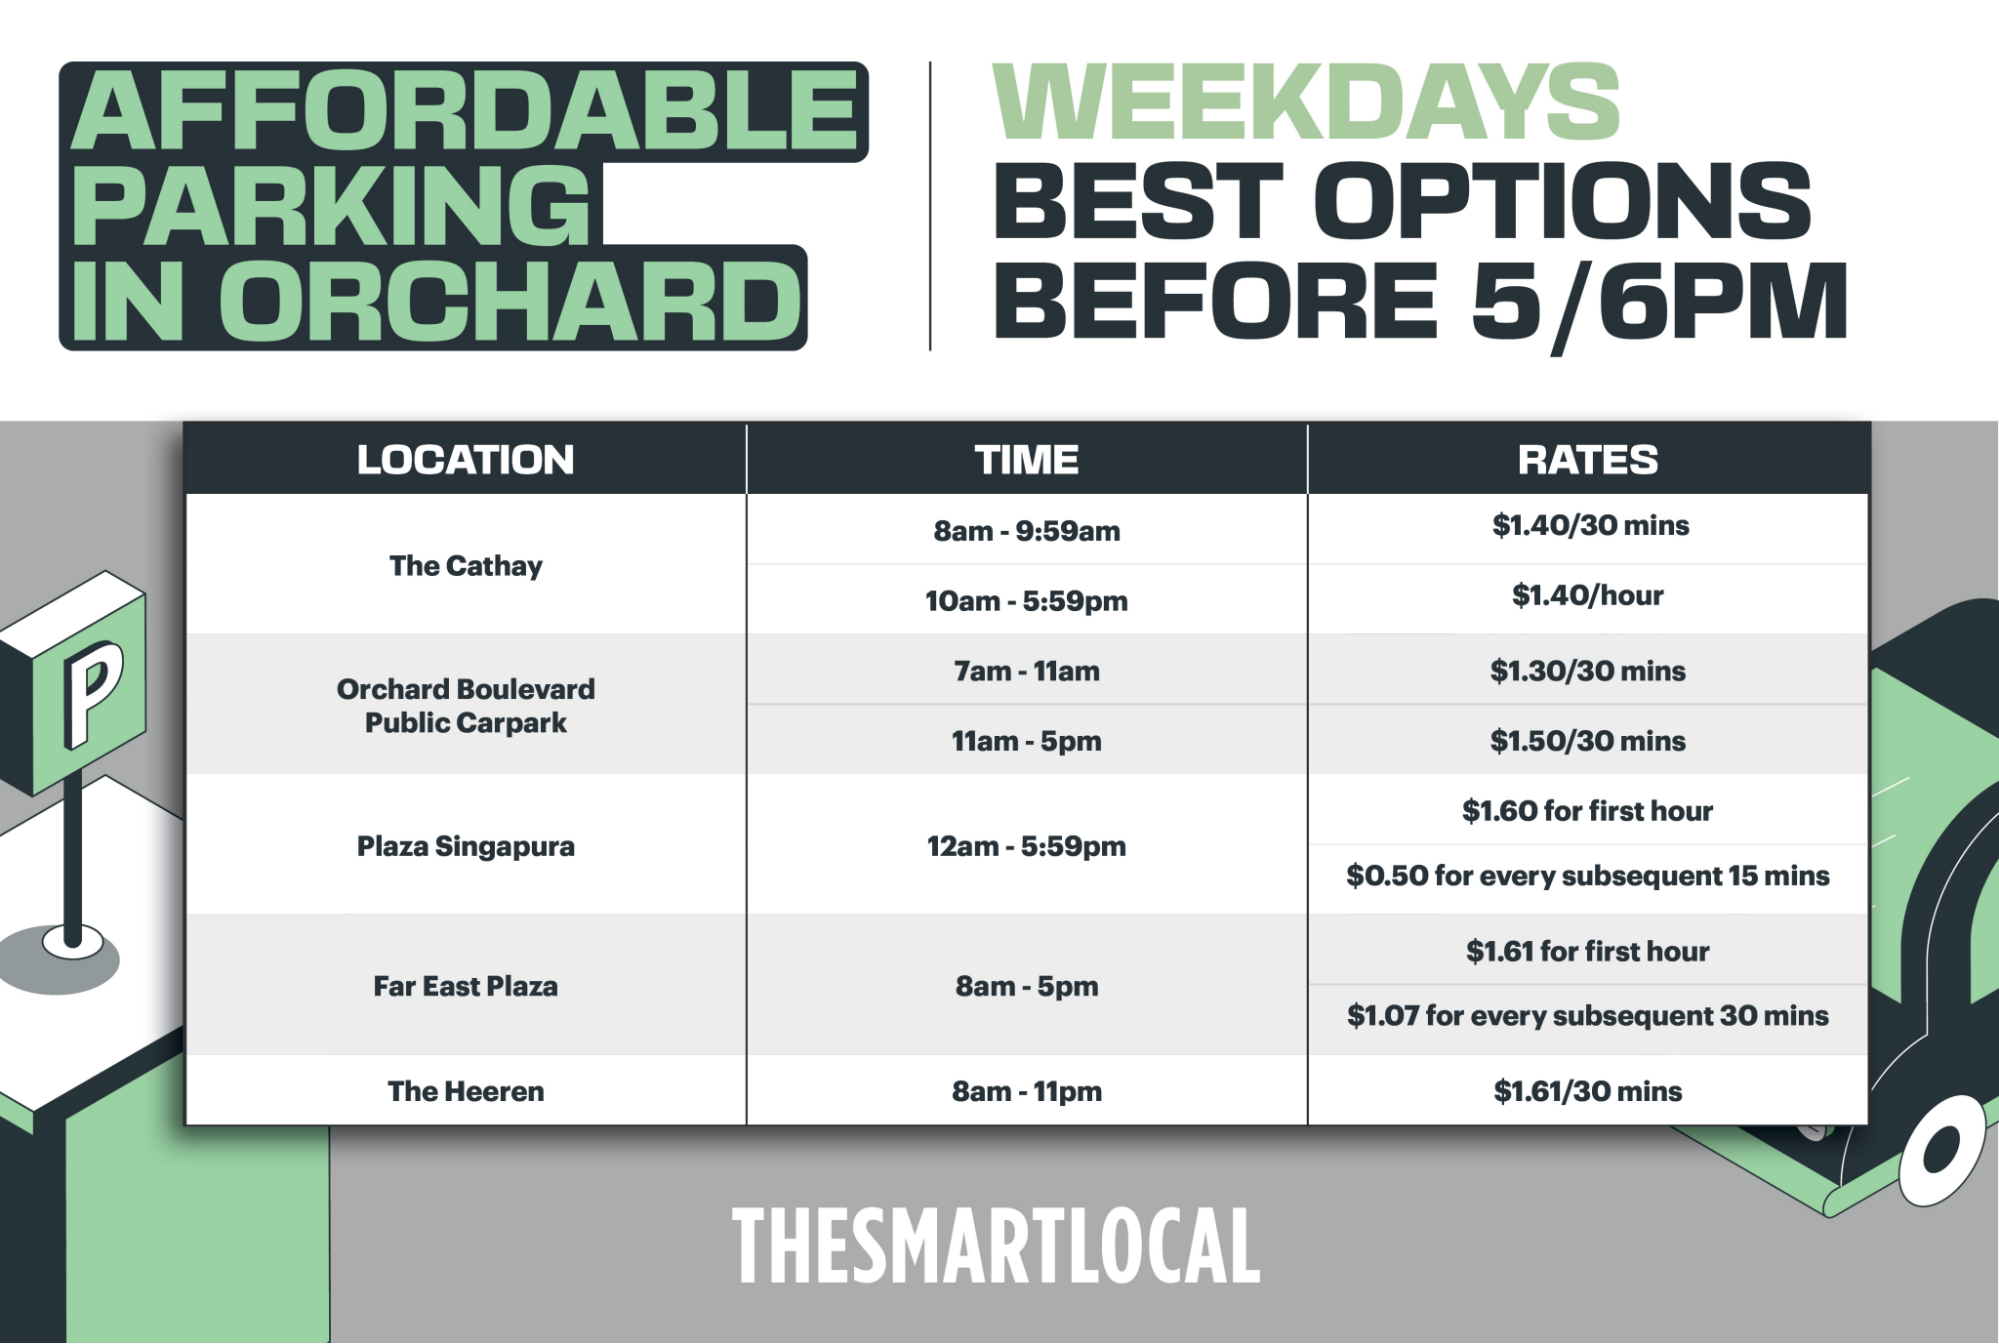 Affordable parking in Orchard